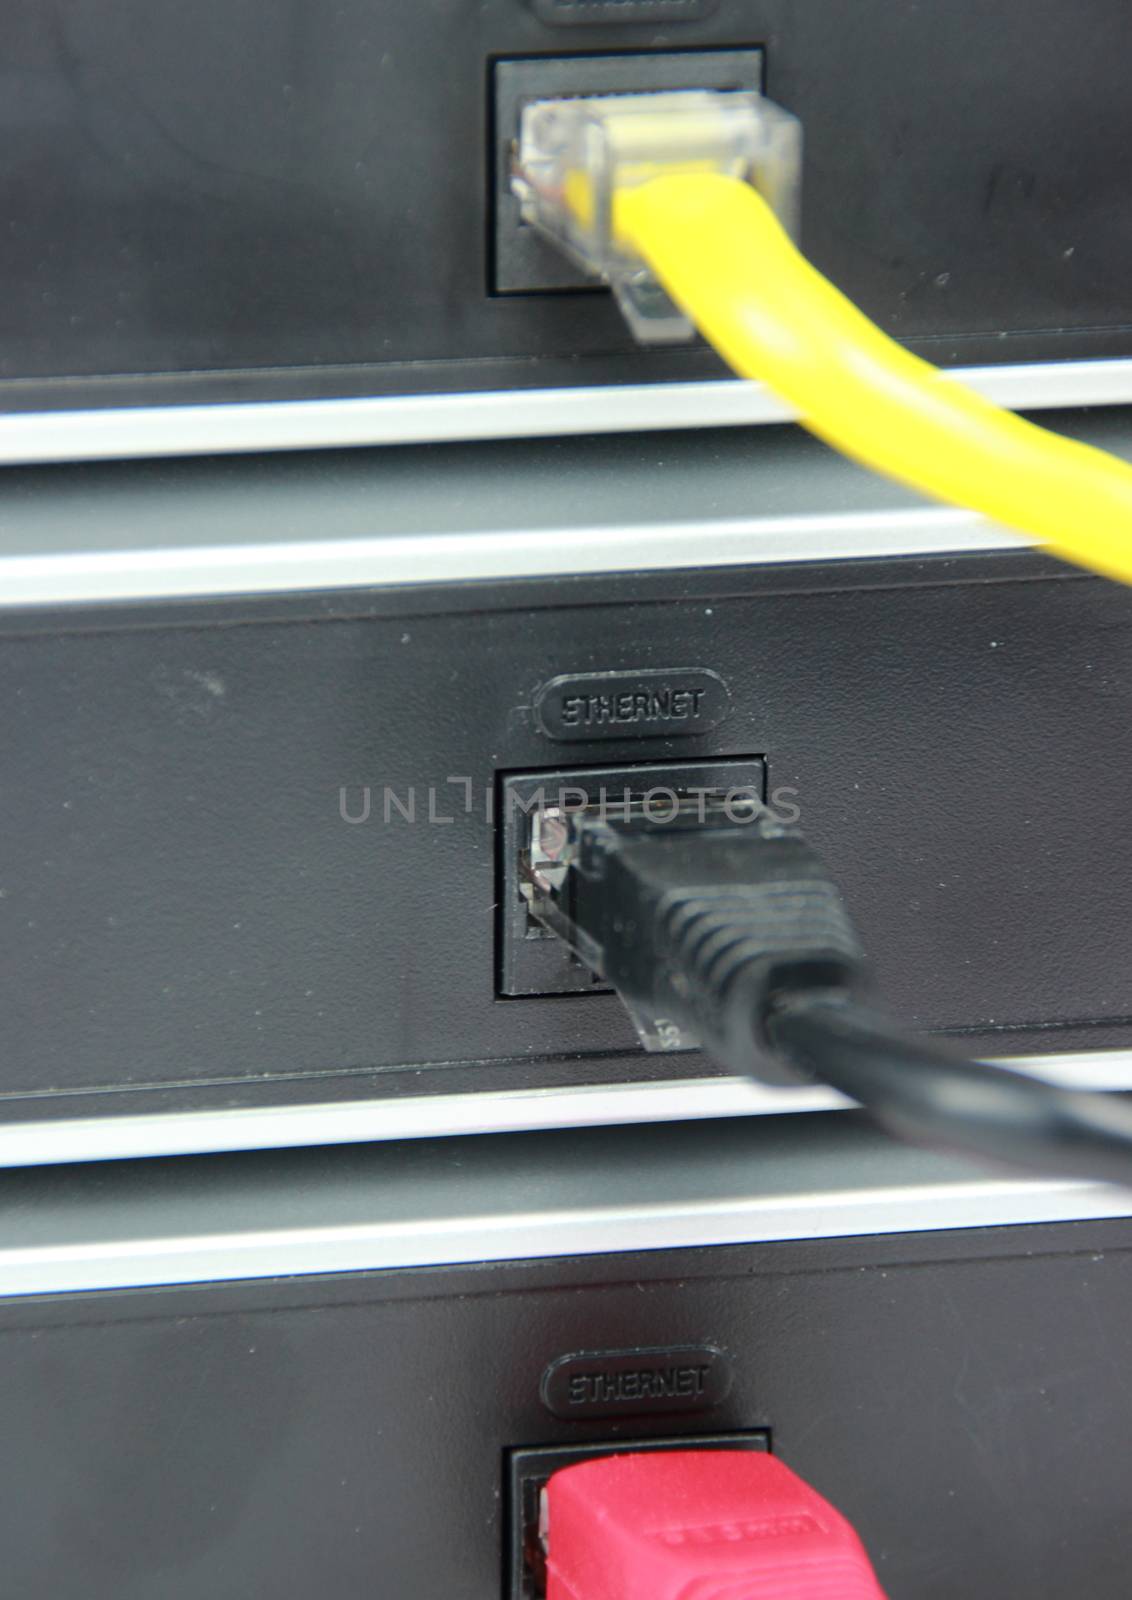 Cables connected to internet port on router